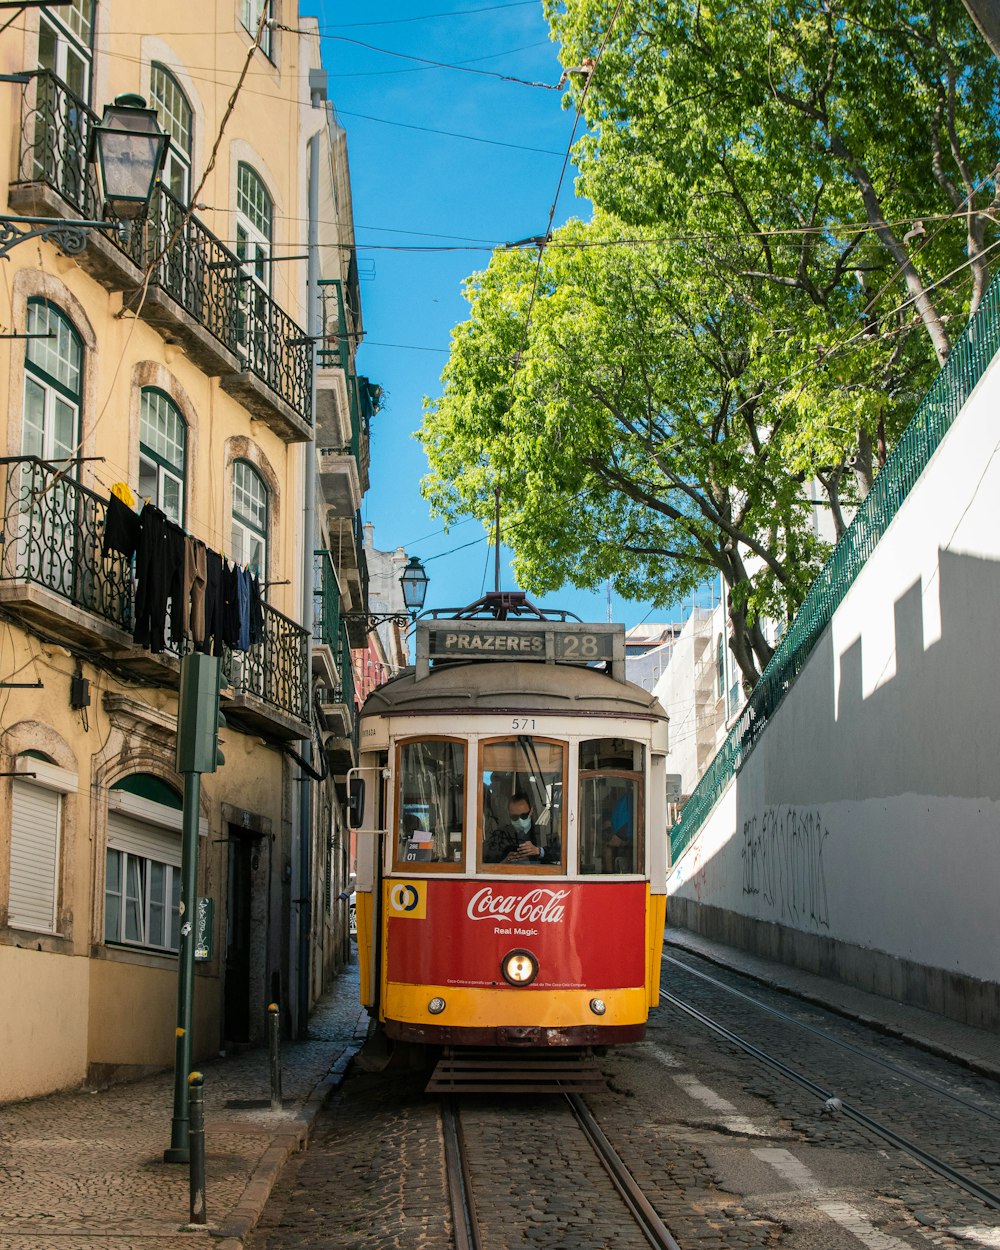 a red and yellow trolley car traveling down a street